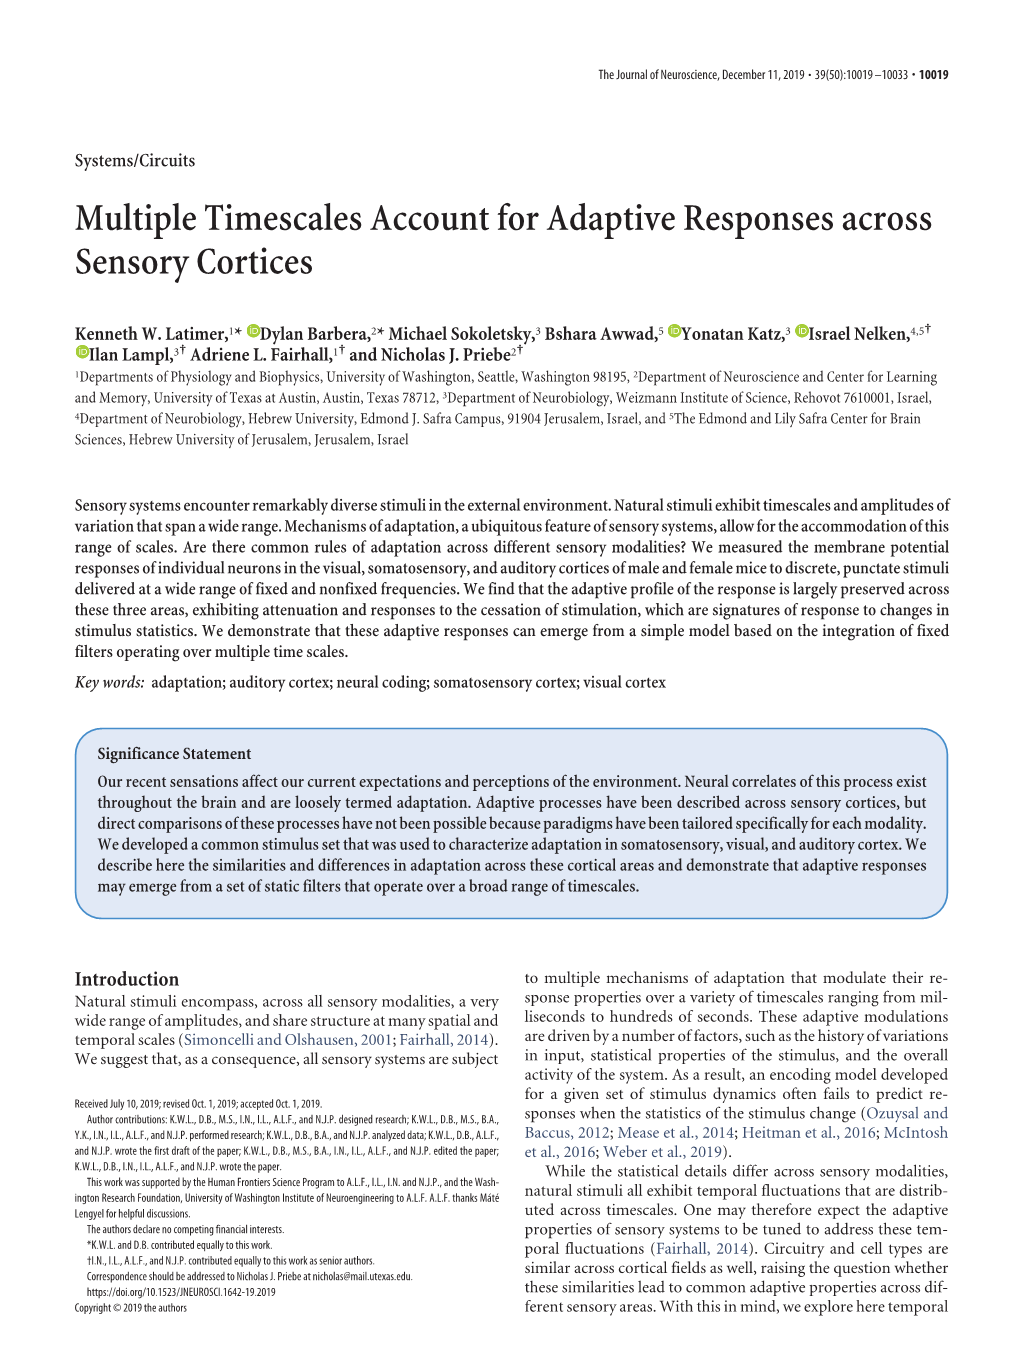 Multiple Timescales Account for Adaptive Responses Across Sensory Cortices